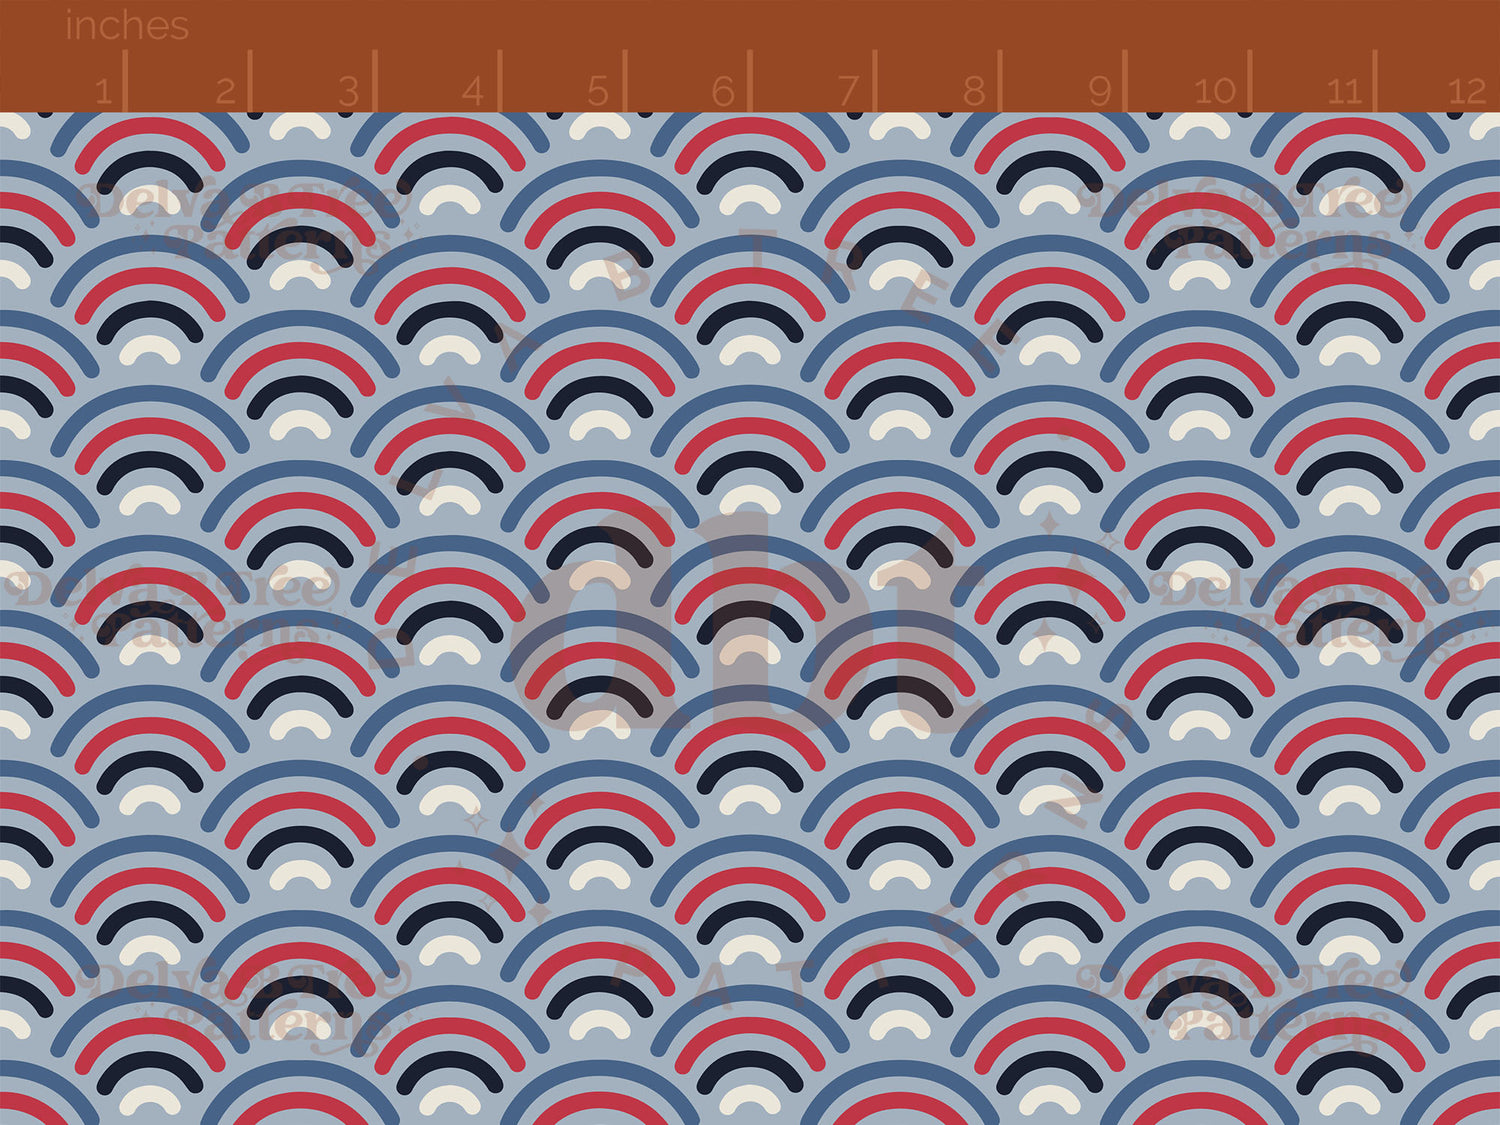 Small red, vintage off white and blue patriotic summer rainbows on a cadet blue background seamless pattern scale digital file for small shops that make handmade products in small batches.